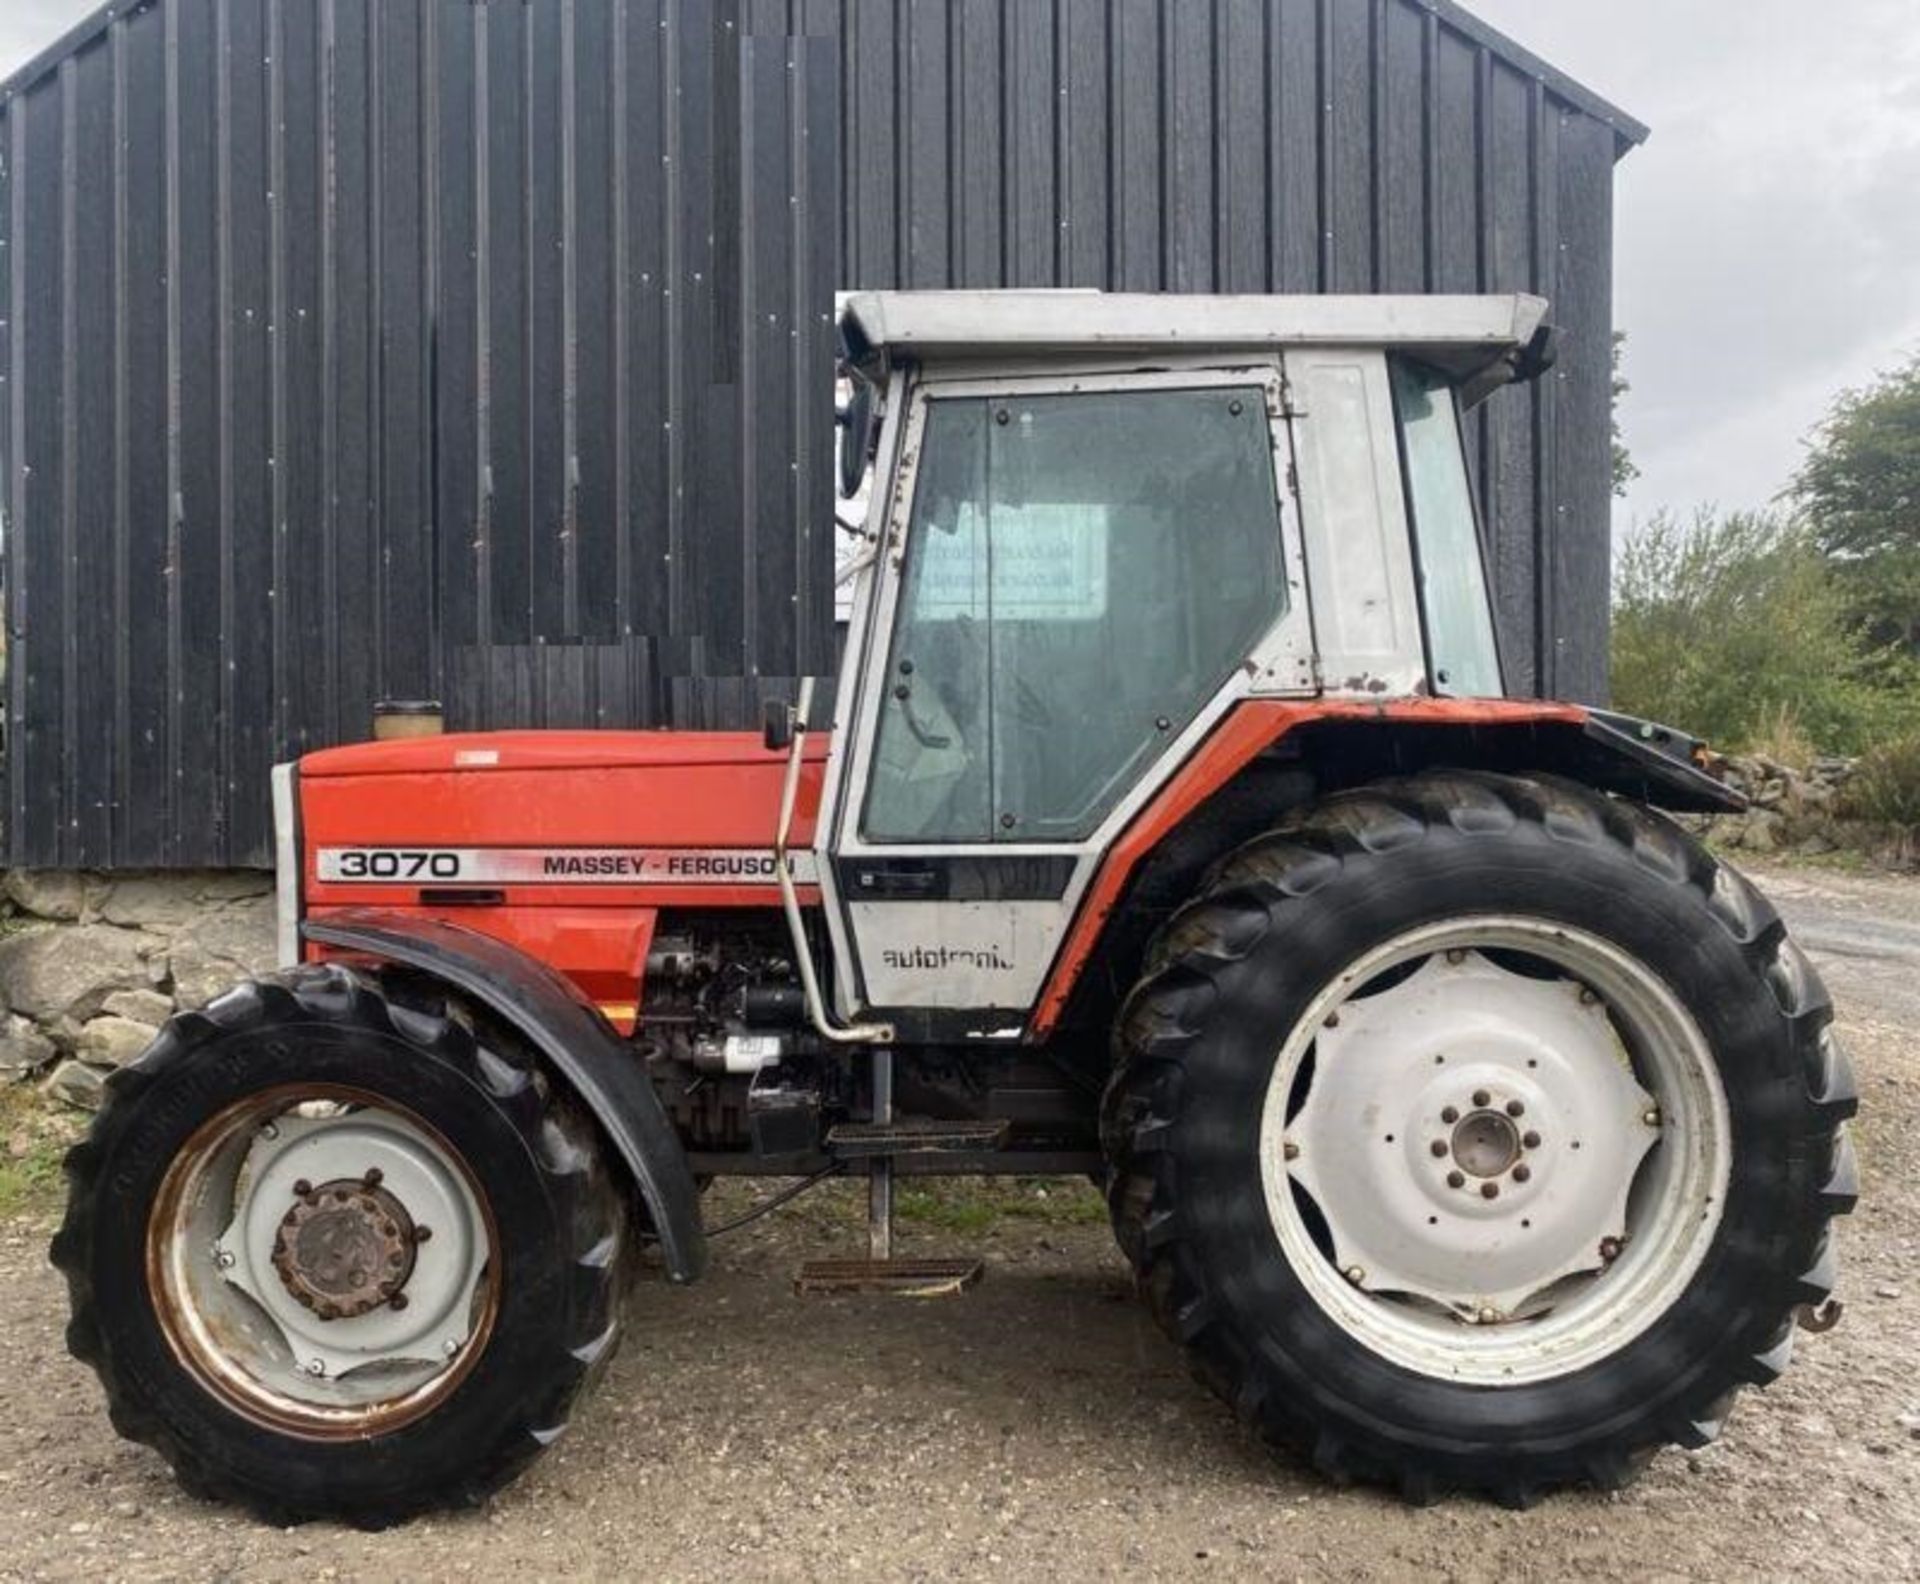 MASSEY FERGUSON 3070 TURBO 4WD AUTOTRONIC FARM TRACTOR - MECHANICALLY PERFECT, READY FOR DUTY! - Image 3 of 11